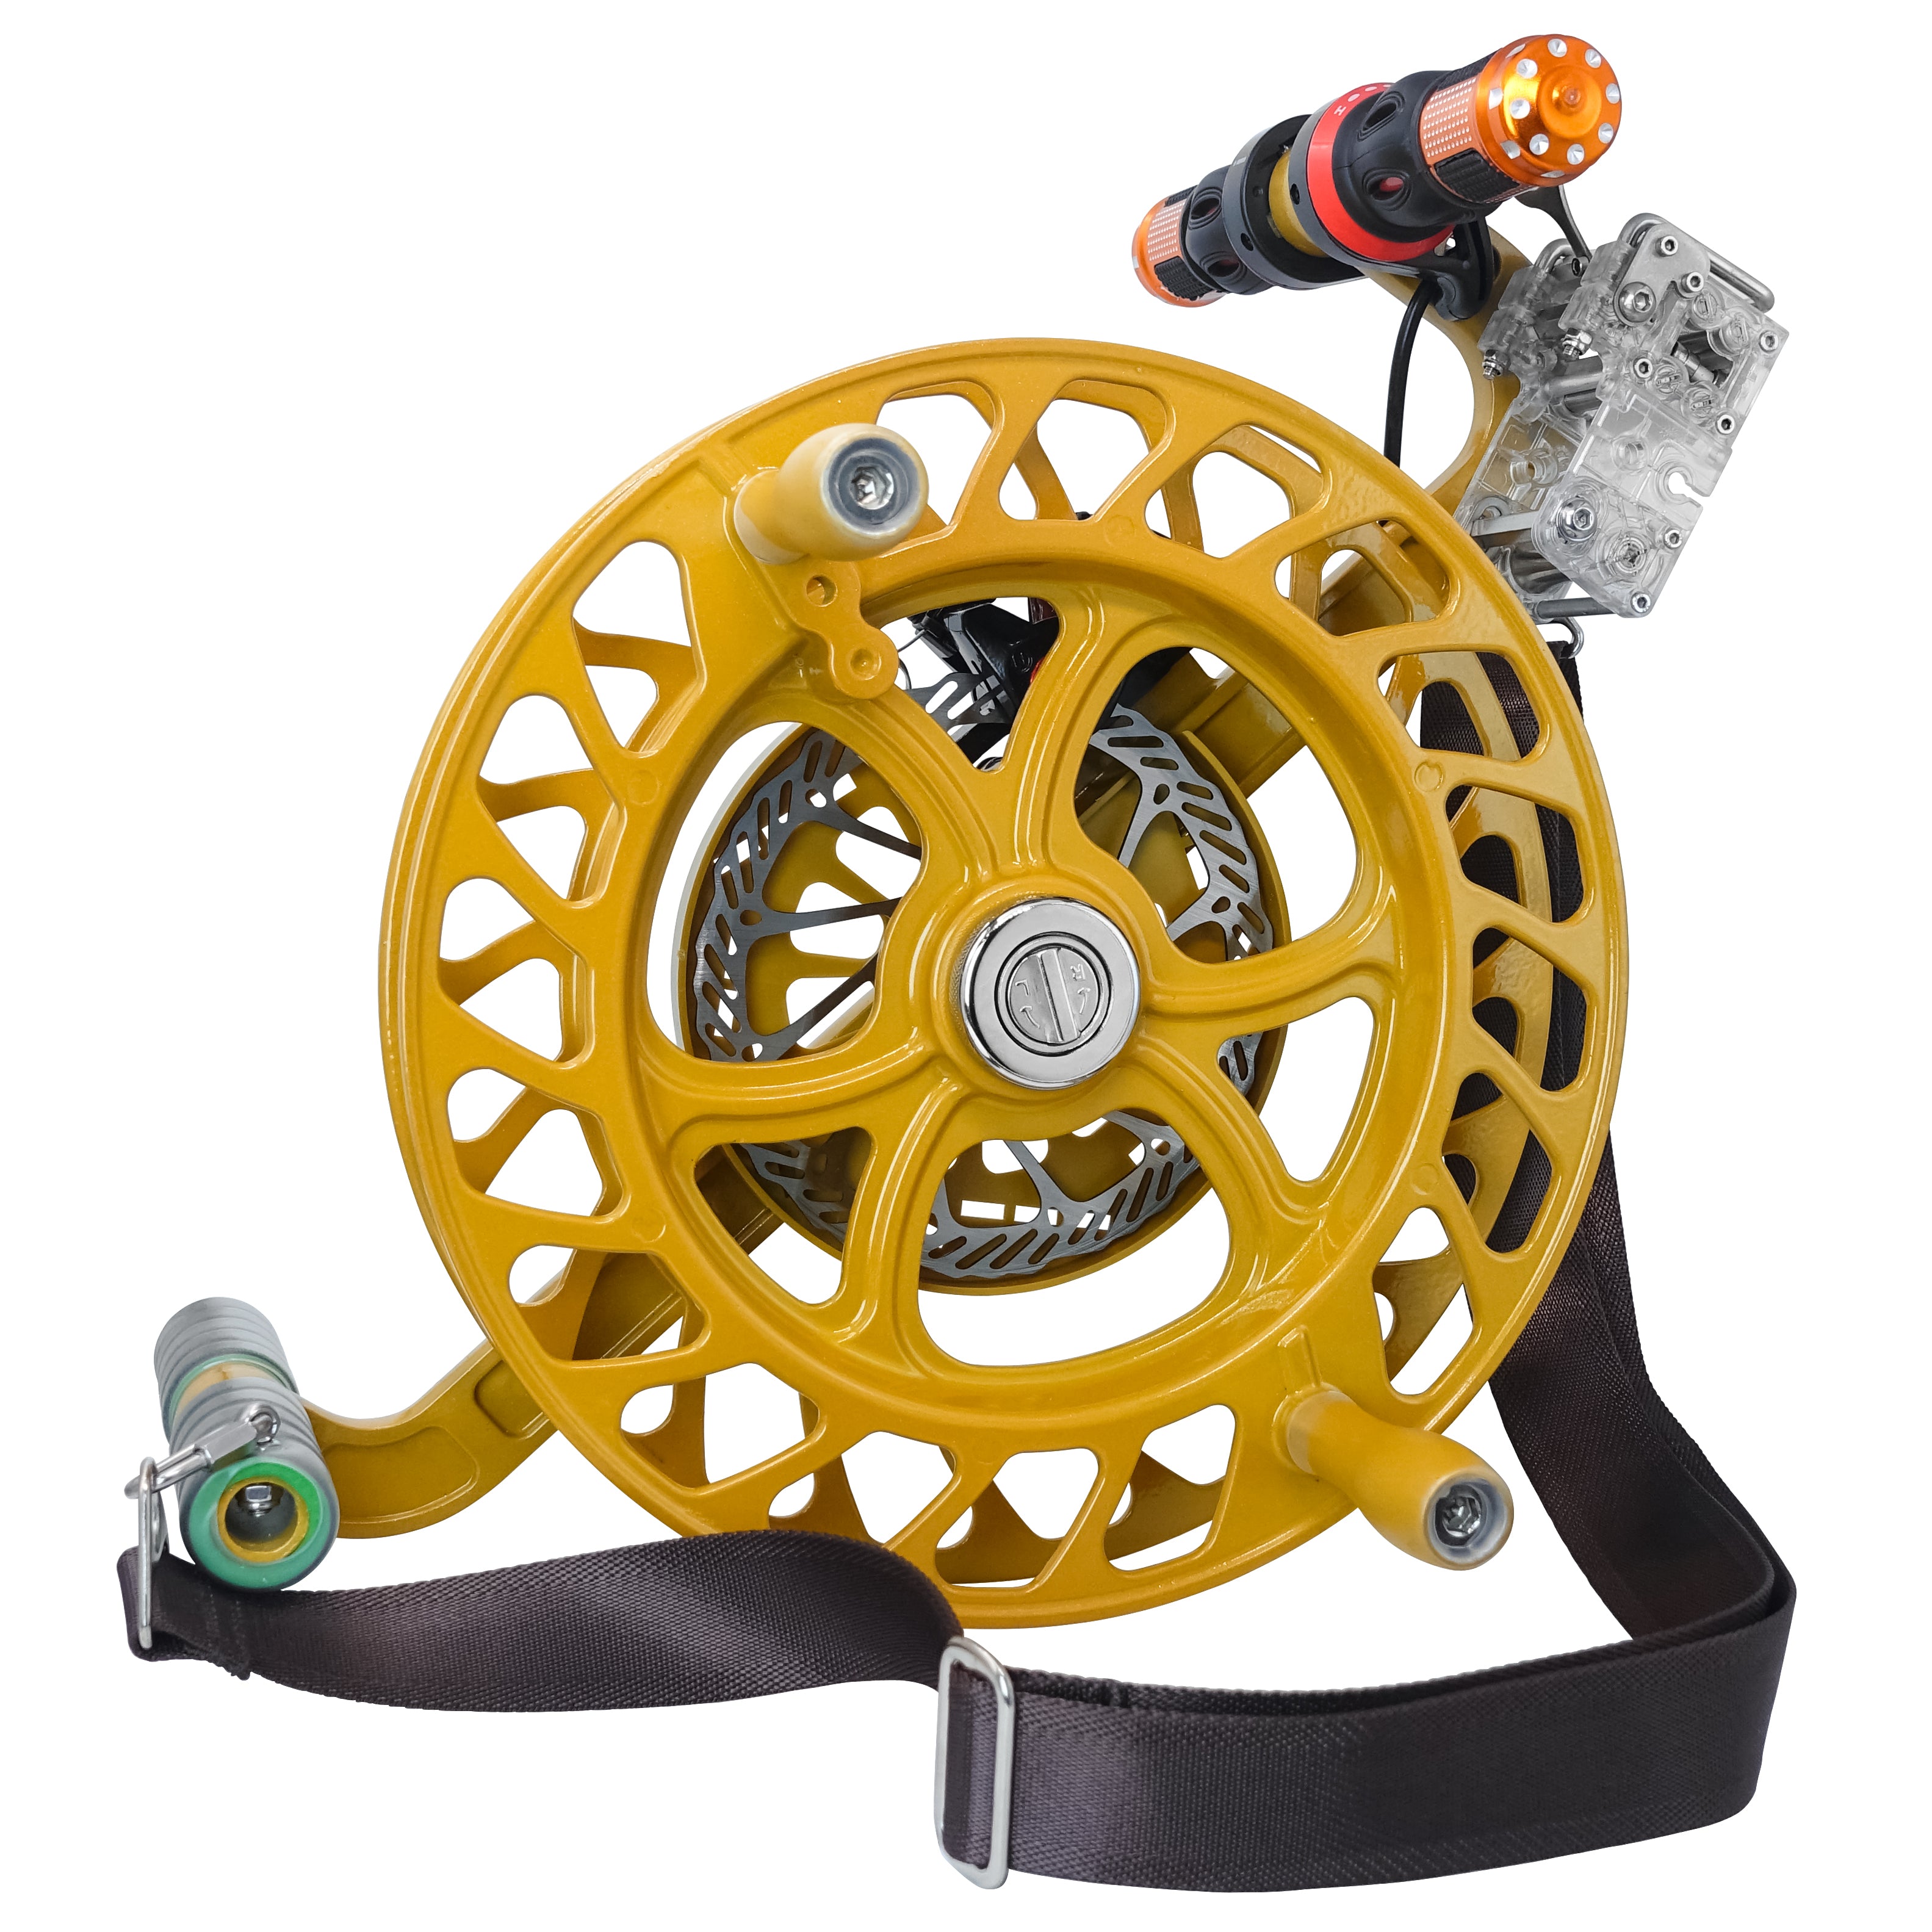 Kite Reel WinderKite Line Winder Winding Reel Grip Wheel Handle with 656ft  Durable String and Lock Function Prof . shop for kizh products in India.